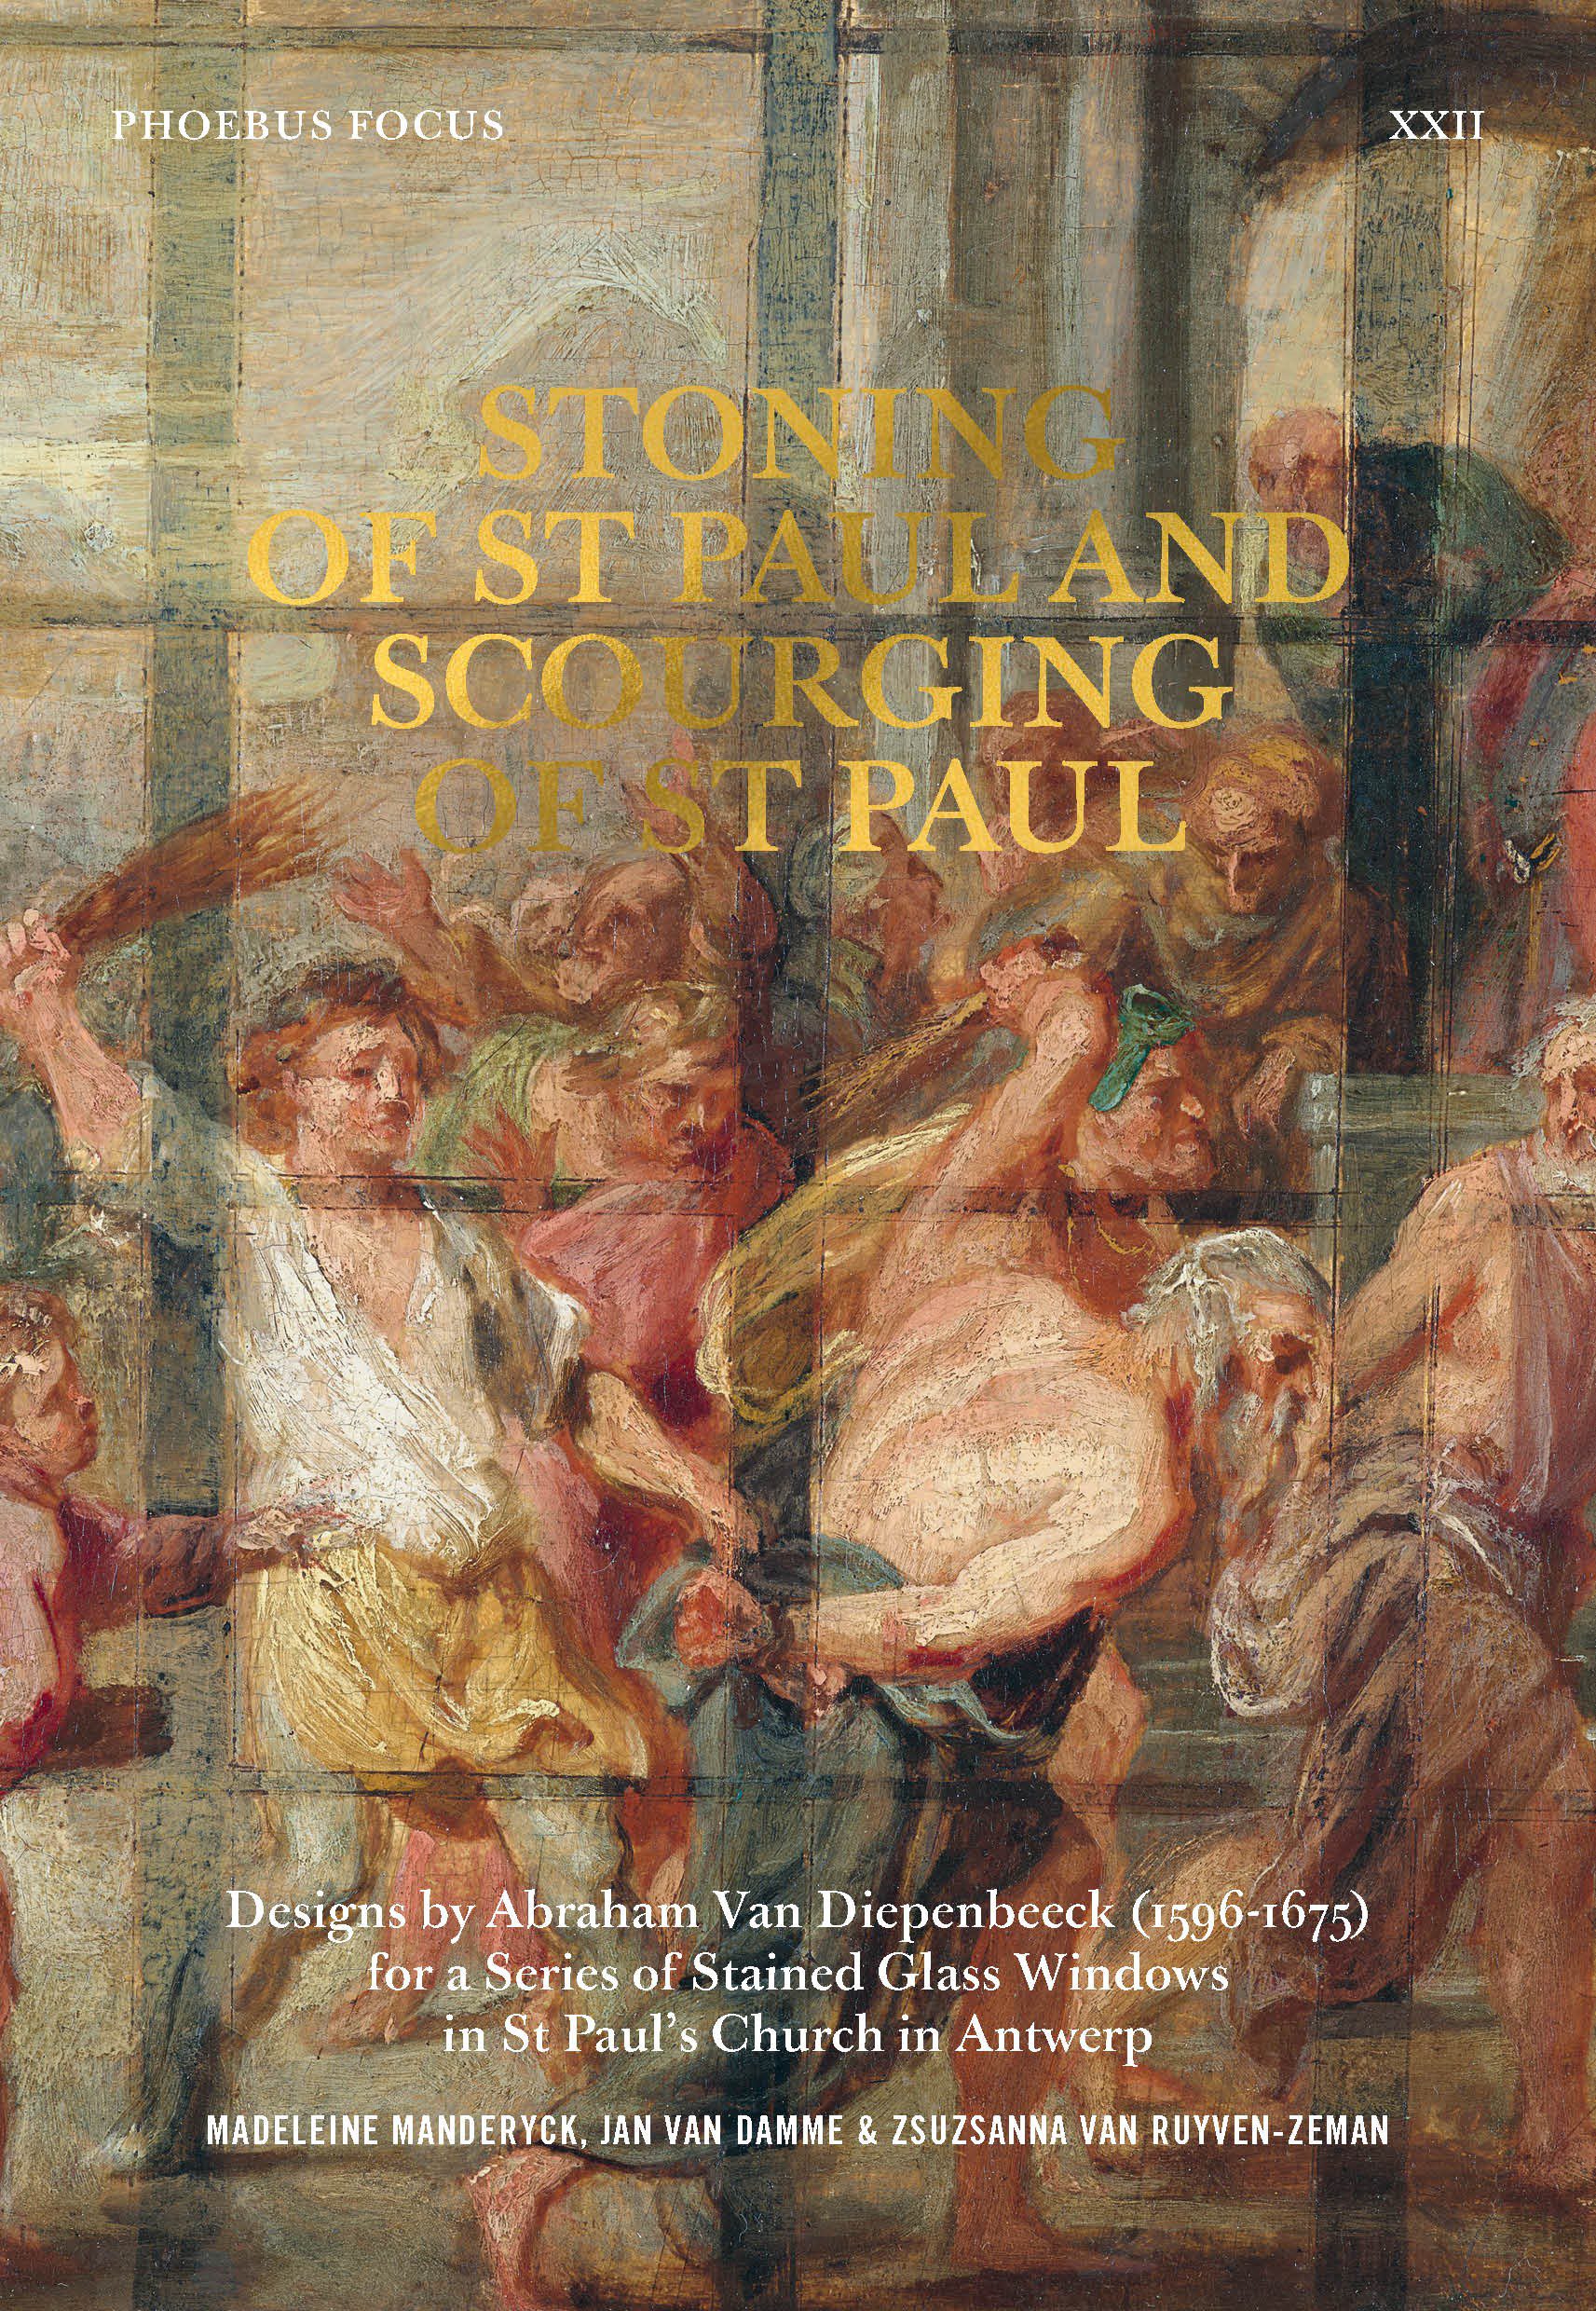 Stoning of Saint Paul and Scourging of Saint Paul